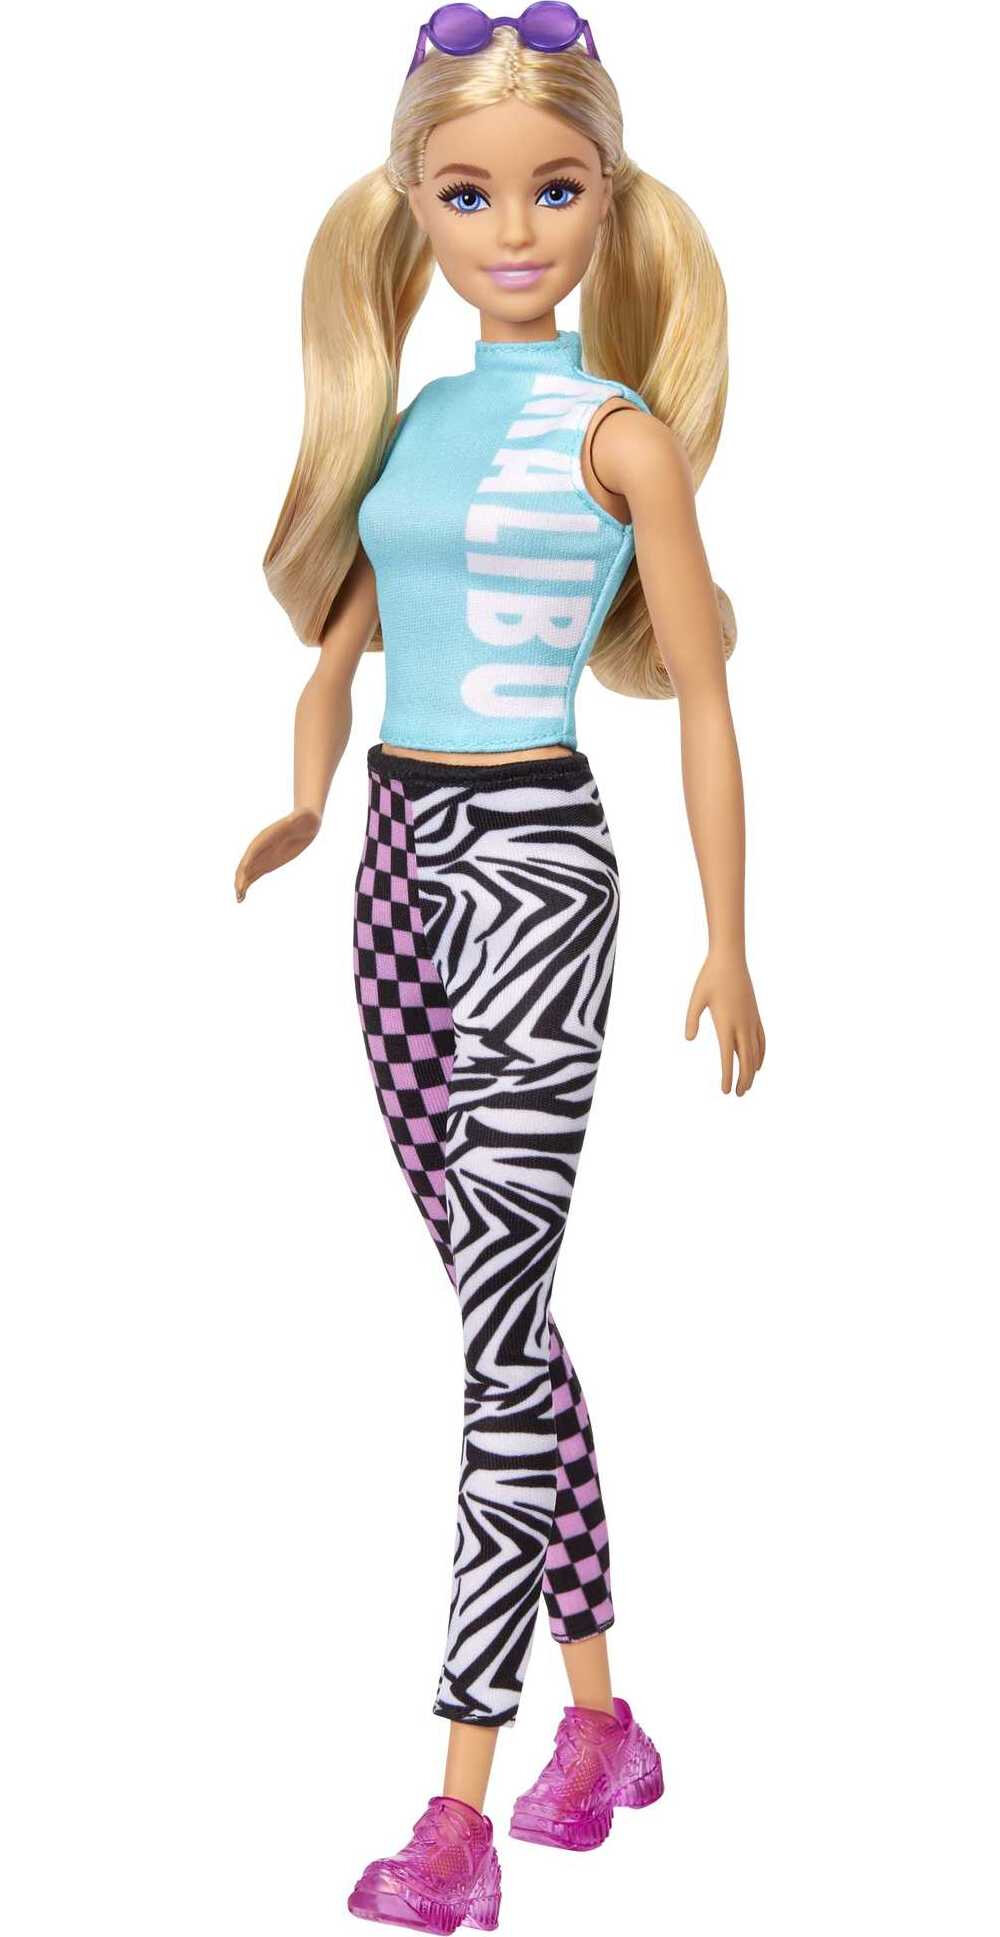 Barbie Fashionistas Doll #158 in Teal Top & Leggings with Blonde Pigtails, Sneakers & Sunglasses - image 4 of 7